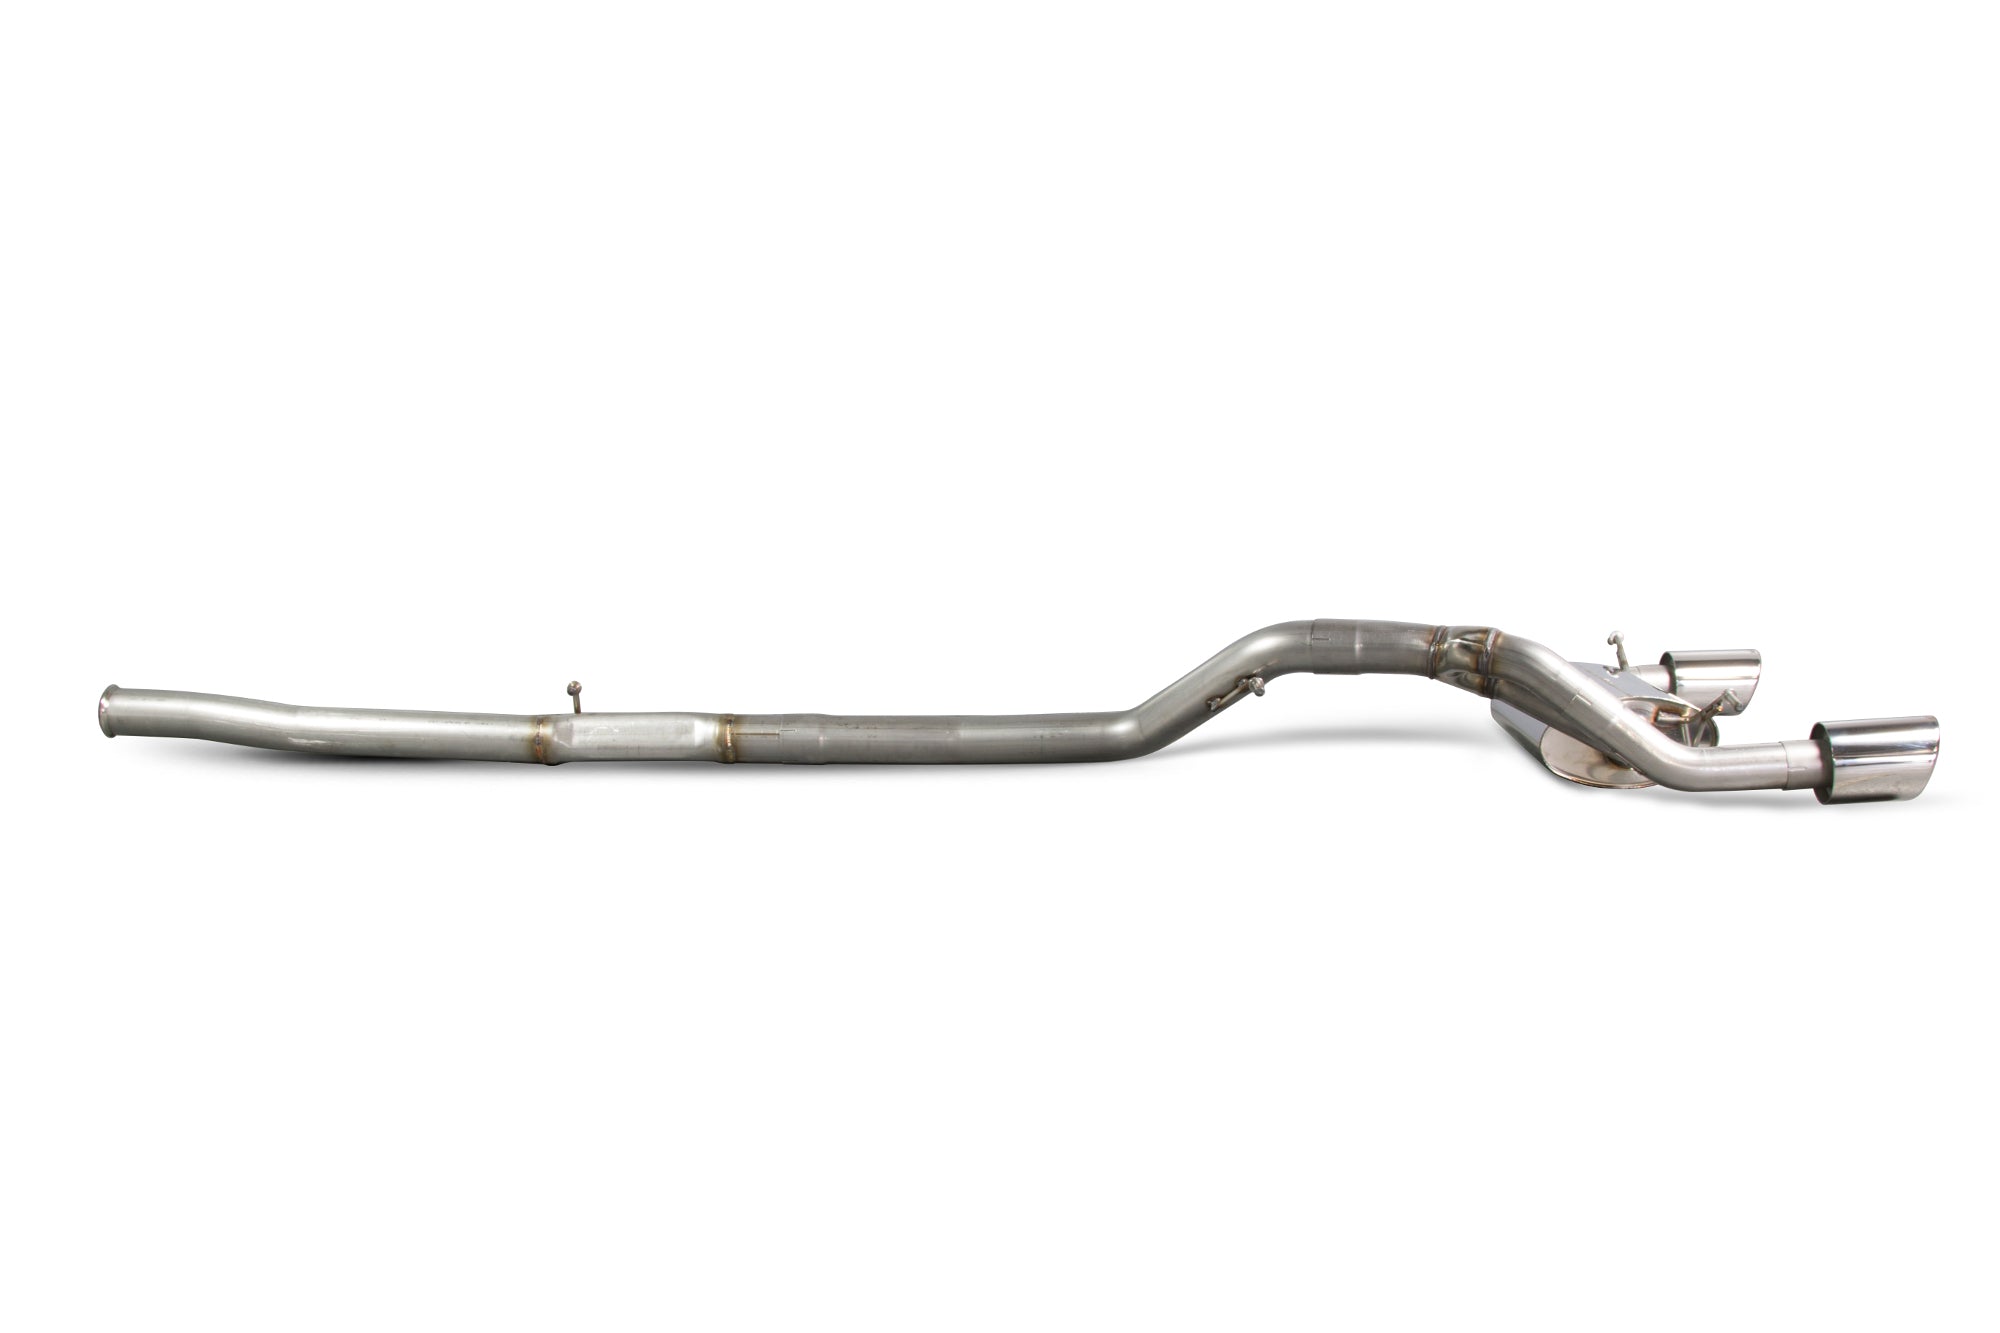 Scorpion Cat Back Exhaust System (Non-Valved - Indy Tip) - Ford Focus MK3 RS Non GPF Model Only